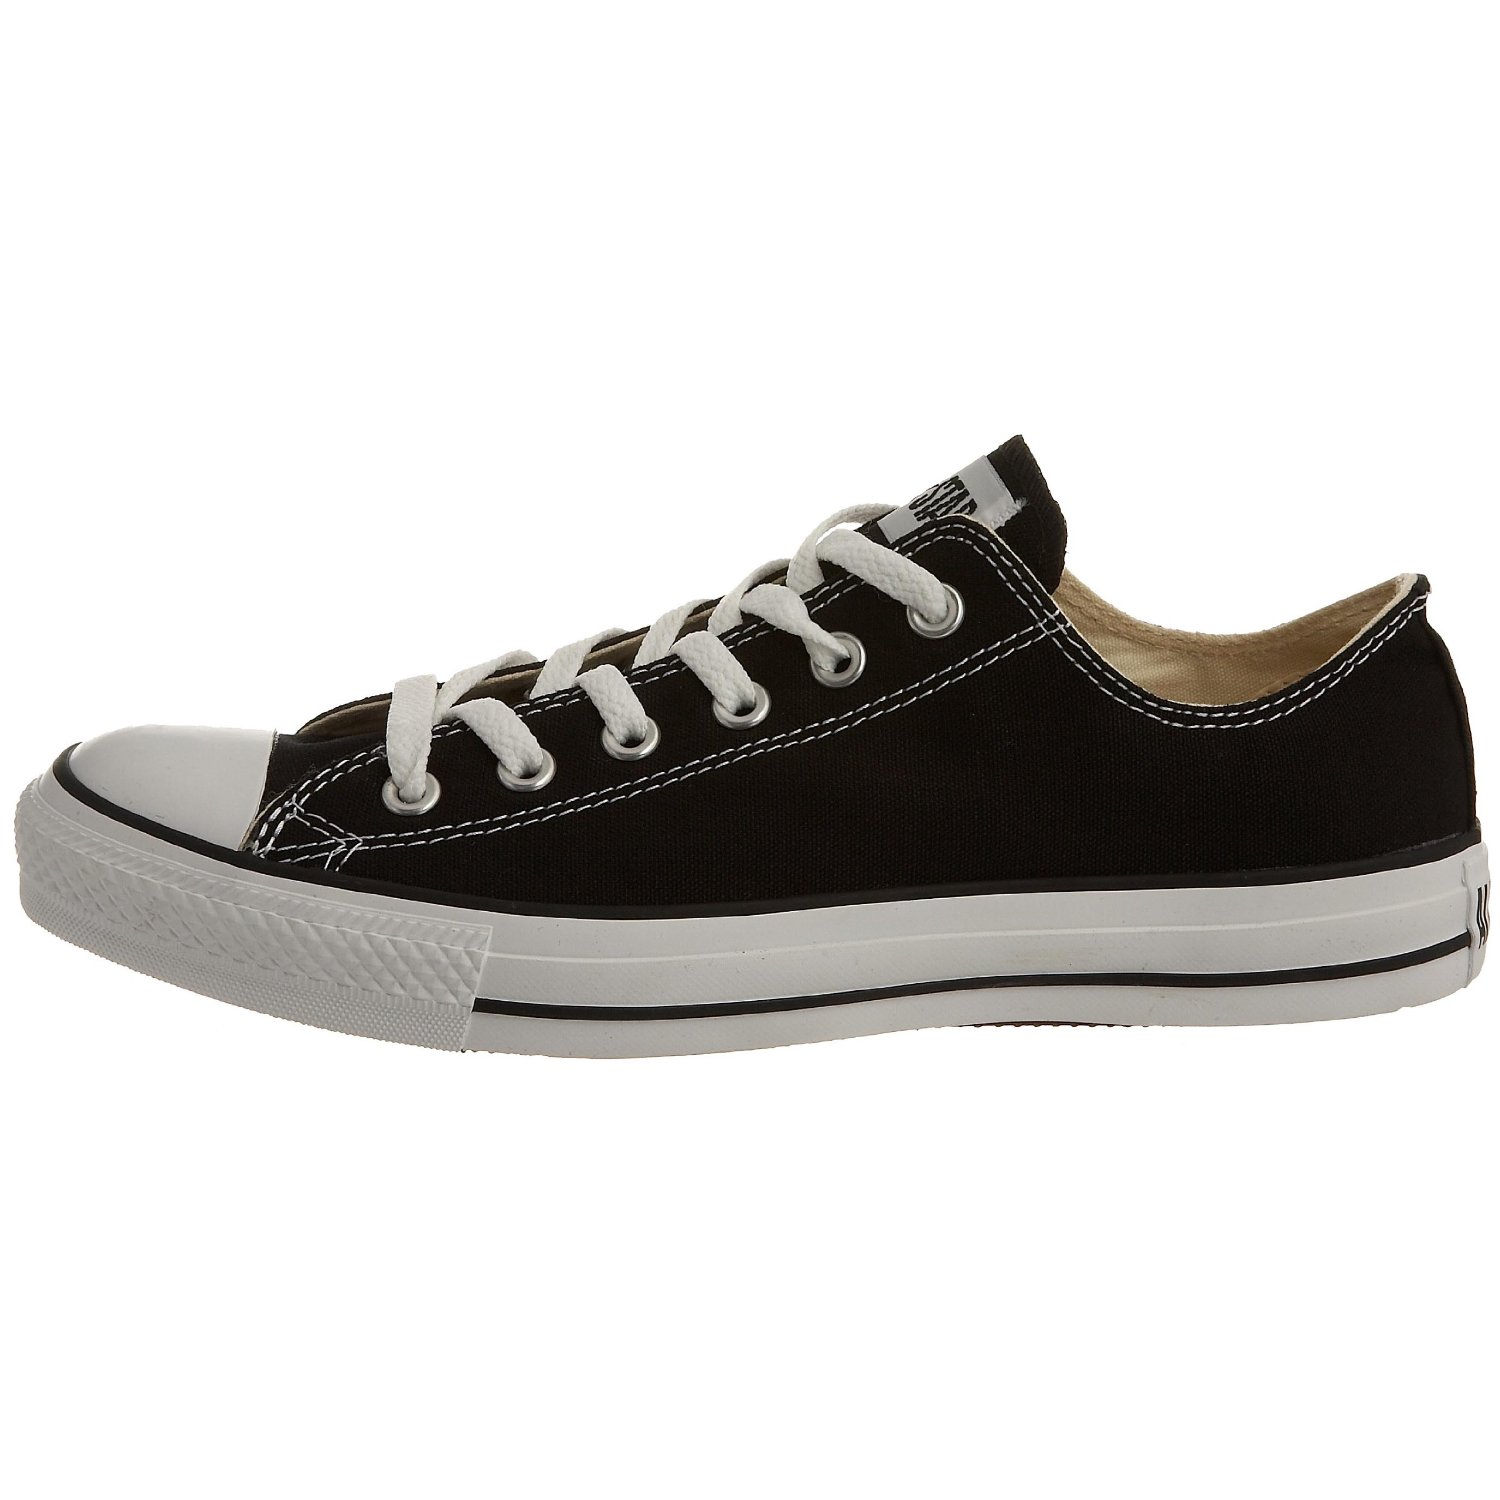 Converse Kids's CONVERSE CHUCK TAYLOR ALL STAR YTHS OXFORD BASKETBALL SHOES - image 5 of 7